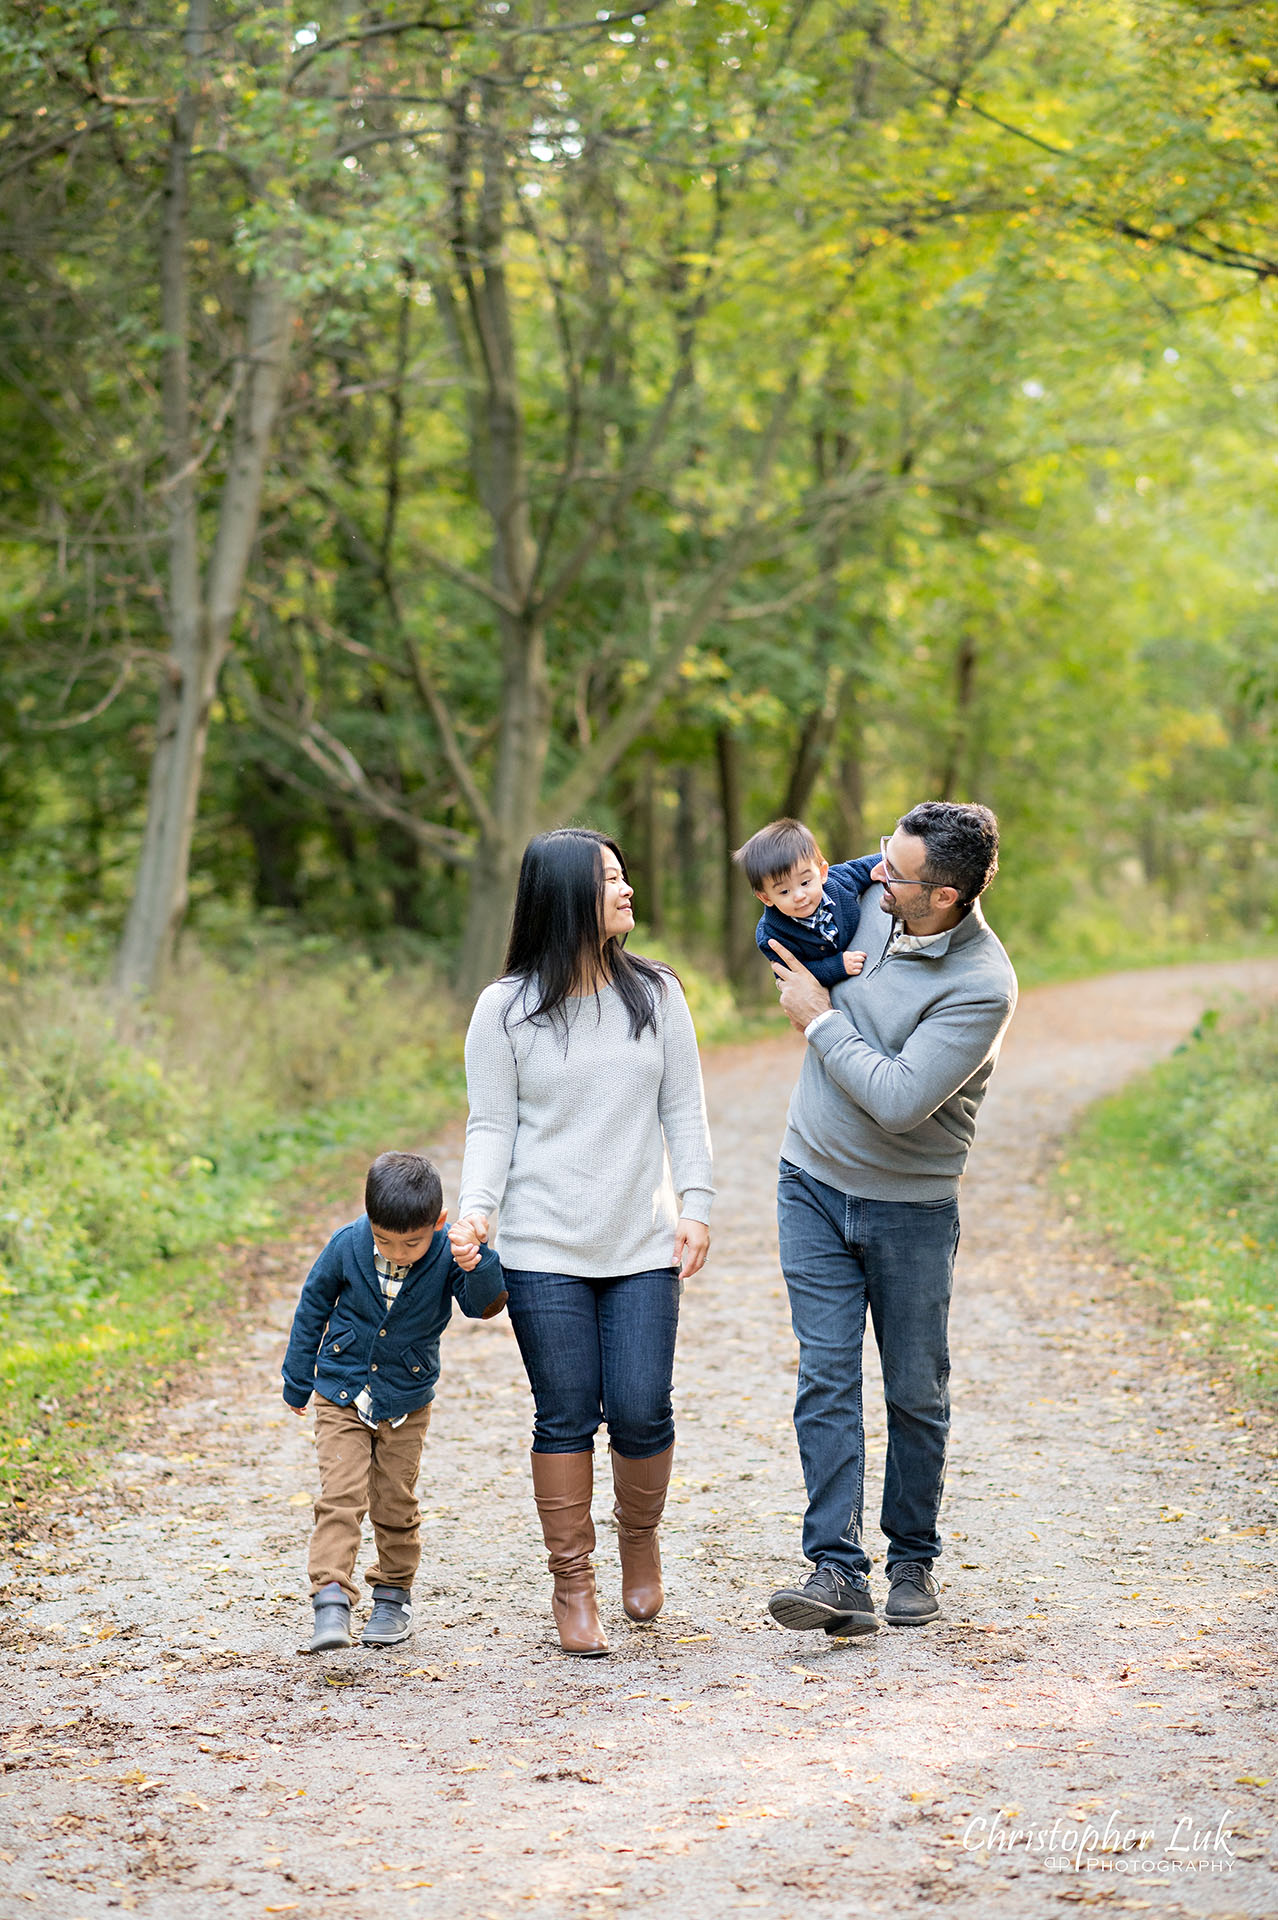 Christopher Luk Family Photographer Toronto Markham Unionville Autumn Fall Leaves Natural Candid Photojournalistic Sons Brothers Baby Boys Father Dad Mother Mom Motherhood Fatherhood Holding Hands Walking Together Trail Pathway Forest Fun Happy